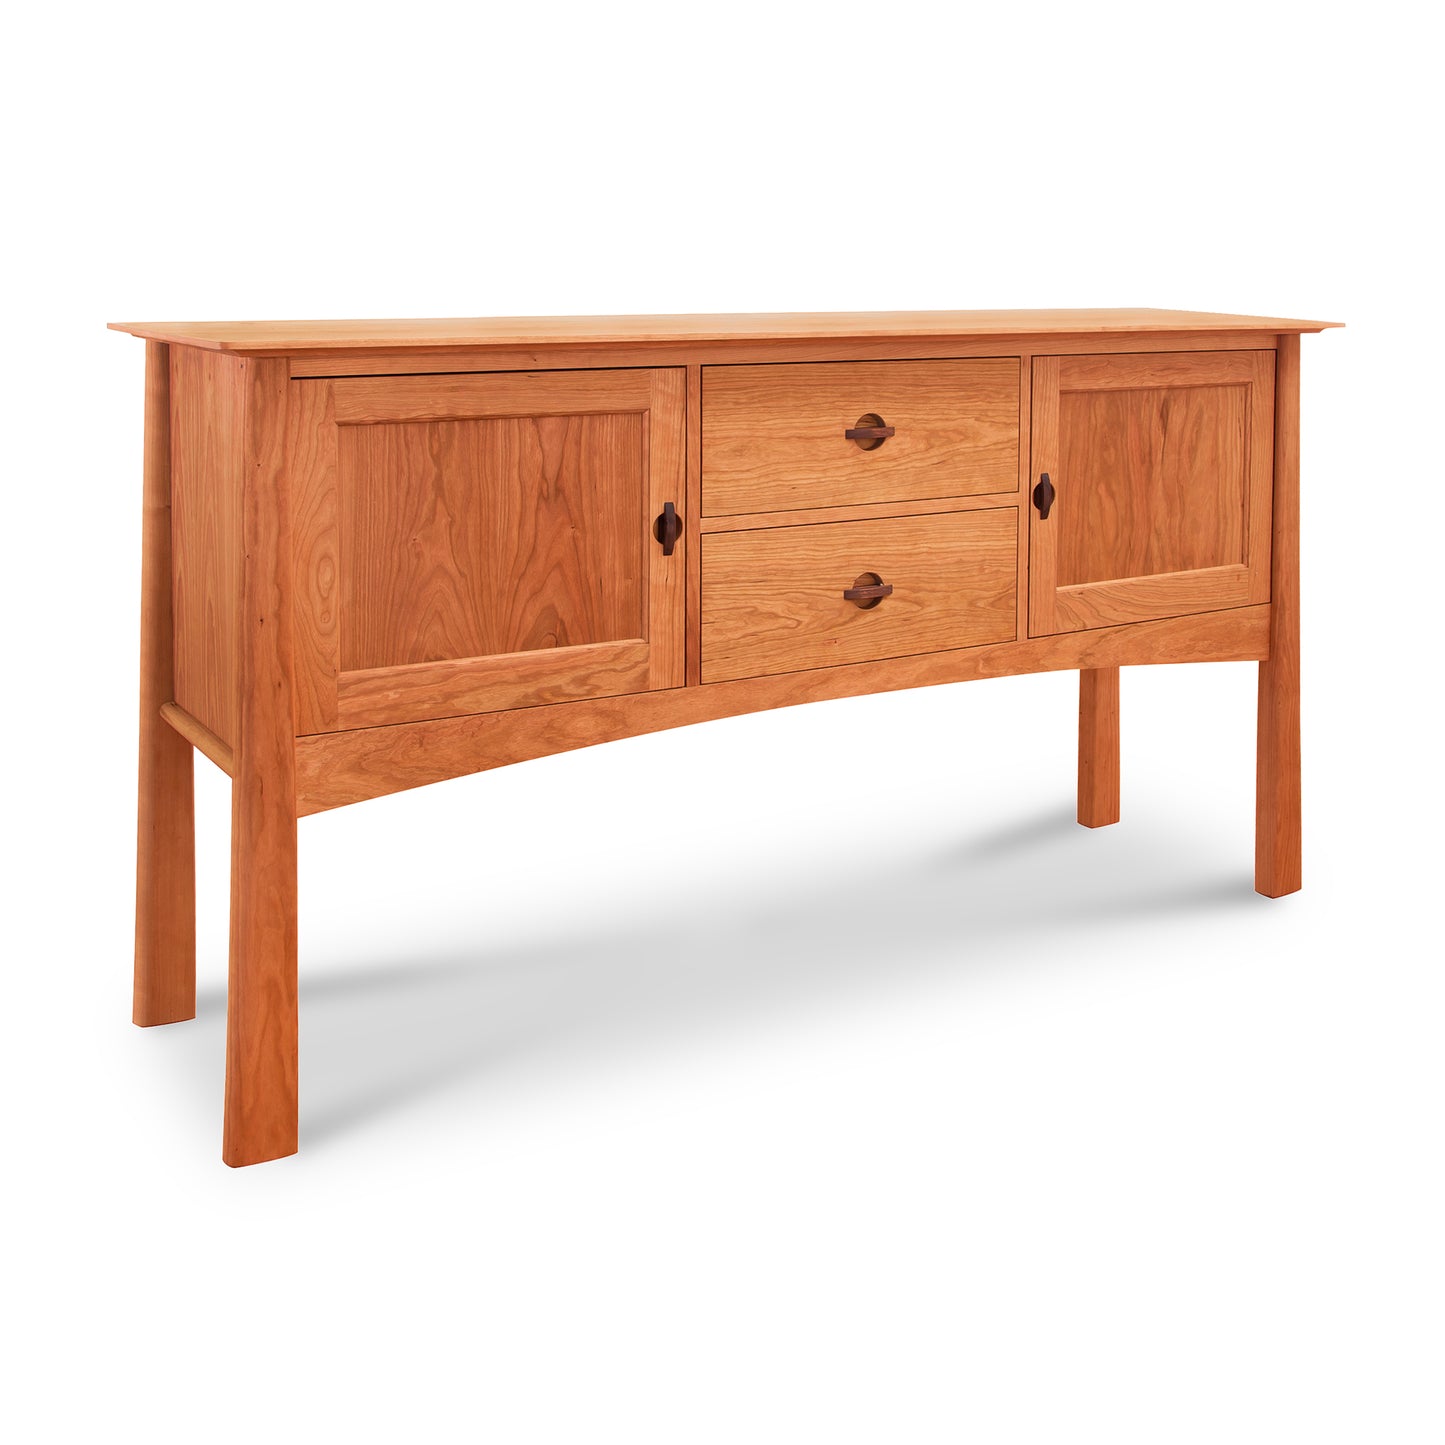 A Maple Corner Woodworks Cherry Moon Huntboard, crafted from natural hardwoods with two doors and three central drawers, featuring round handles and raised on four legs, isolated on a white background.